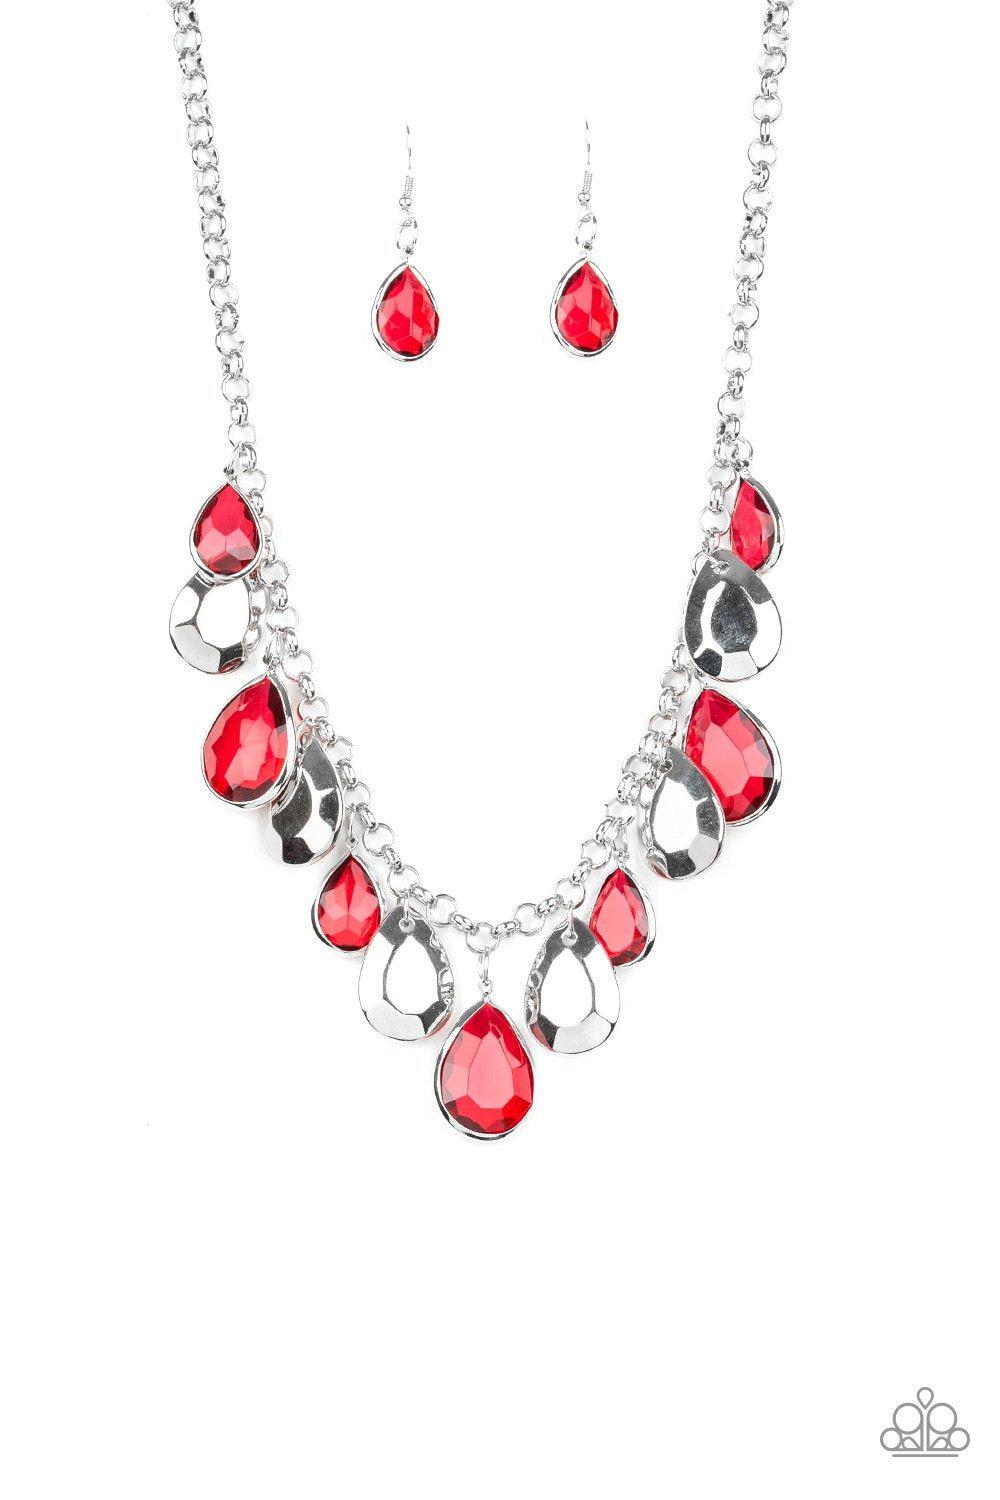 CLIQUE-bait Red and Silver Necklace - Paparazzi Accessories- lightbox - CarasShop.com - $5 Jewelry by Cara Jewels